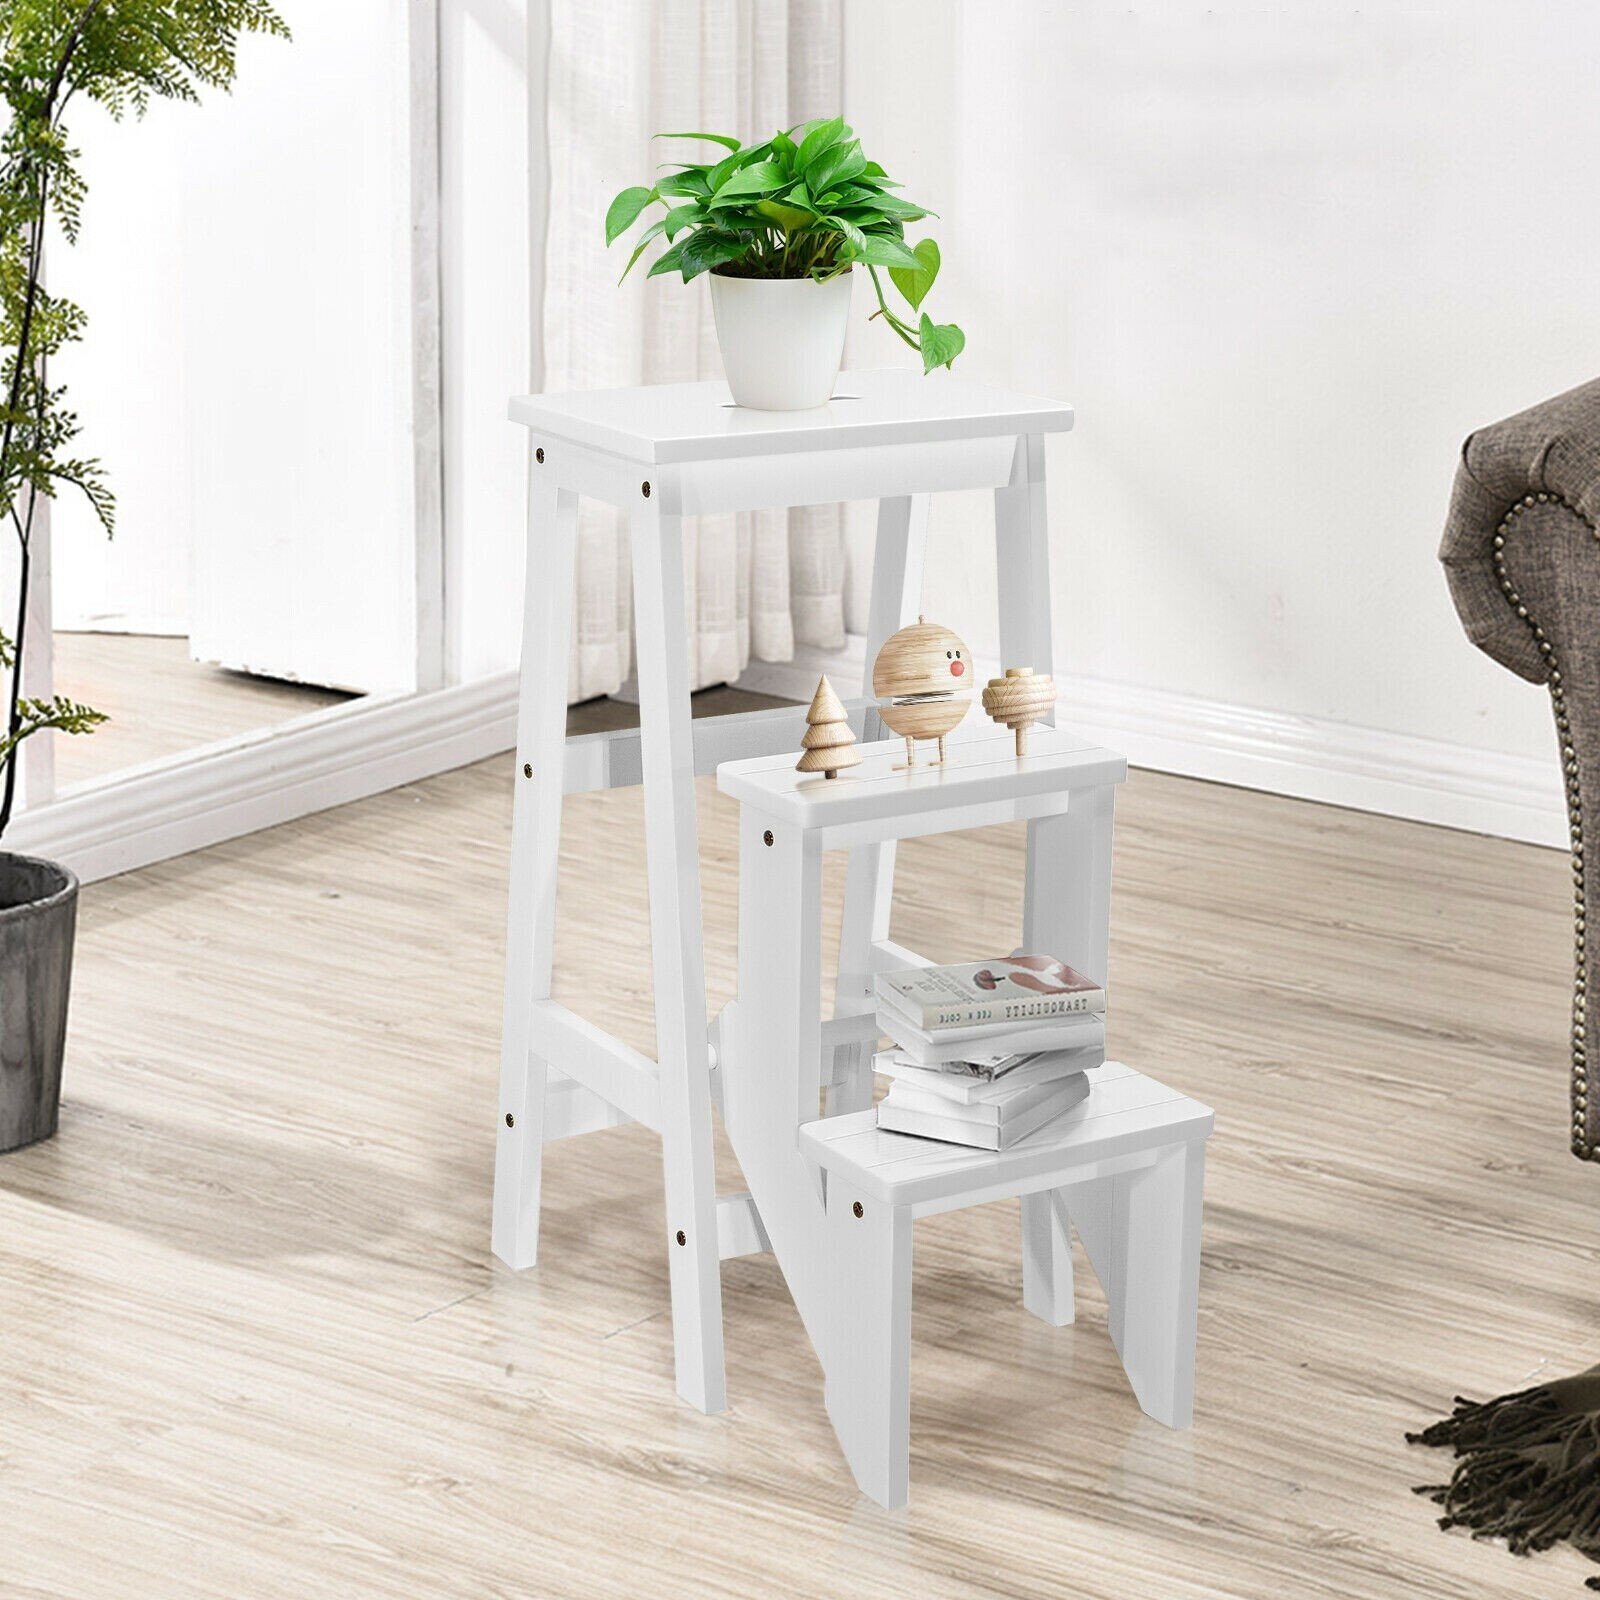 Practical & decorative wooden step stool